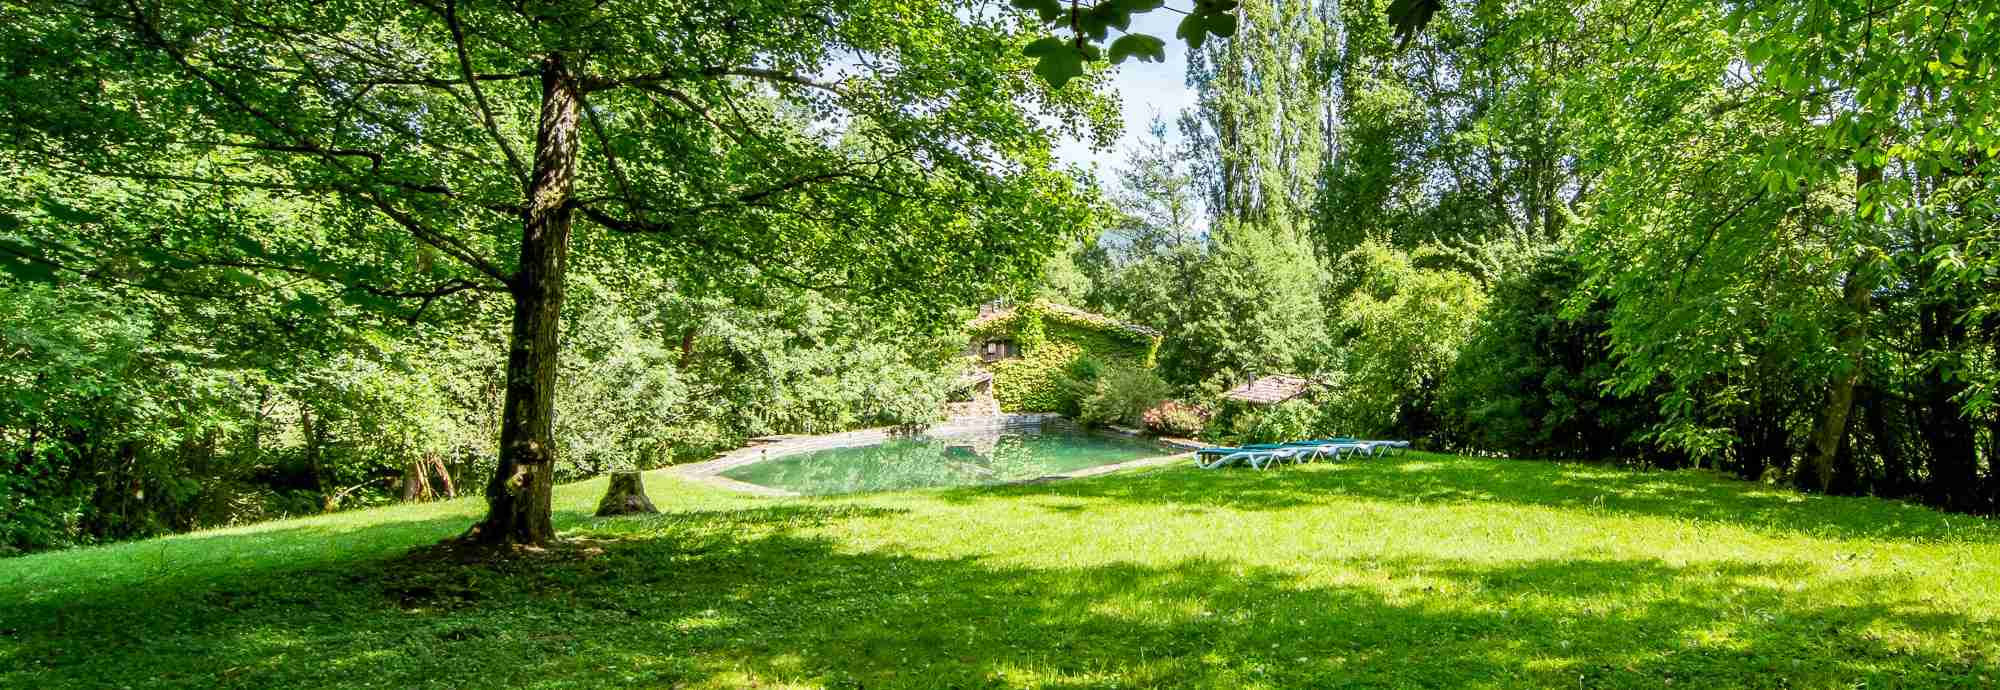 Garrotxa holiday cottage with pool & gardens by the Spanish Pyrenees